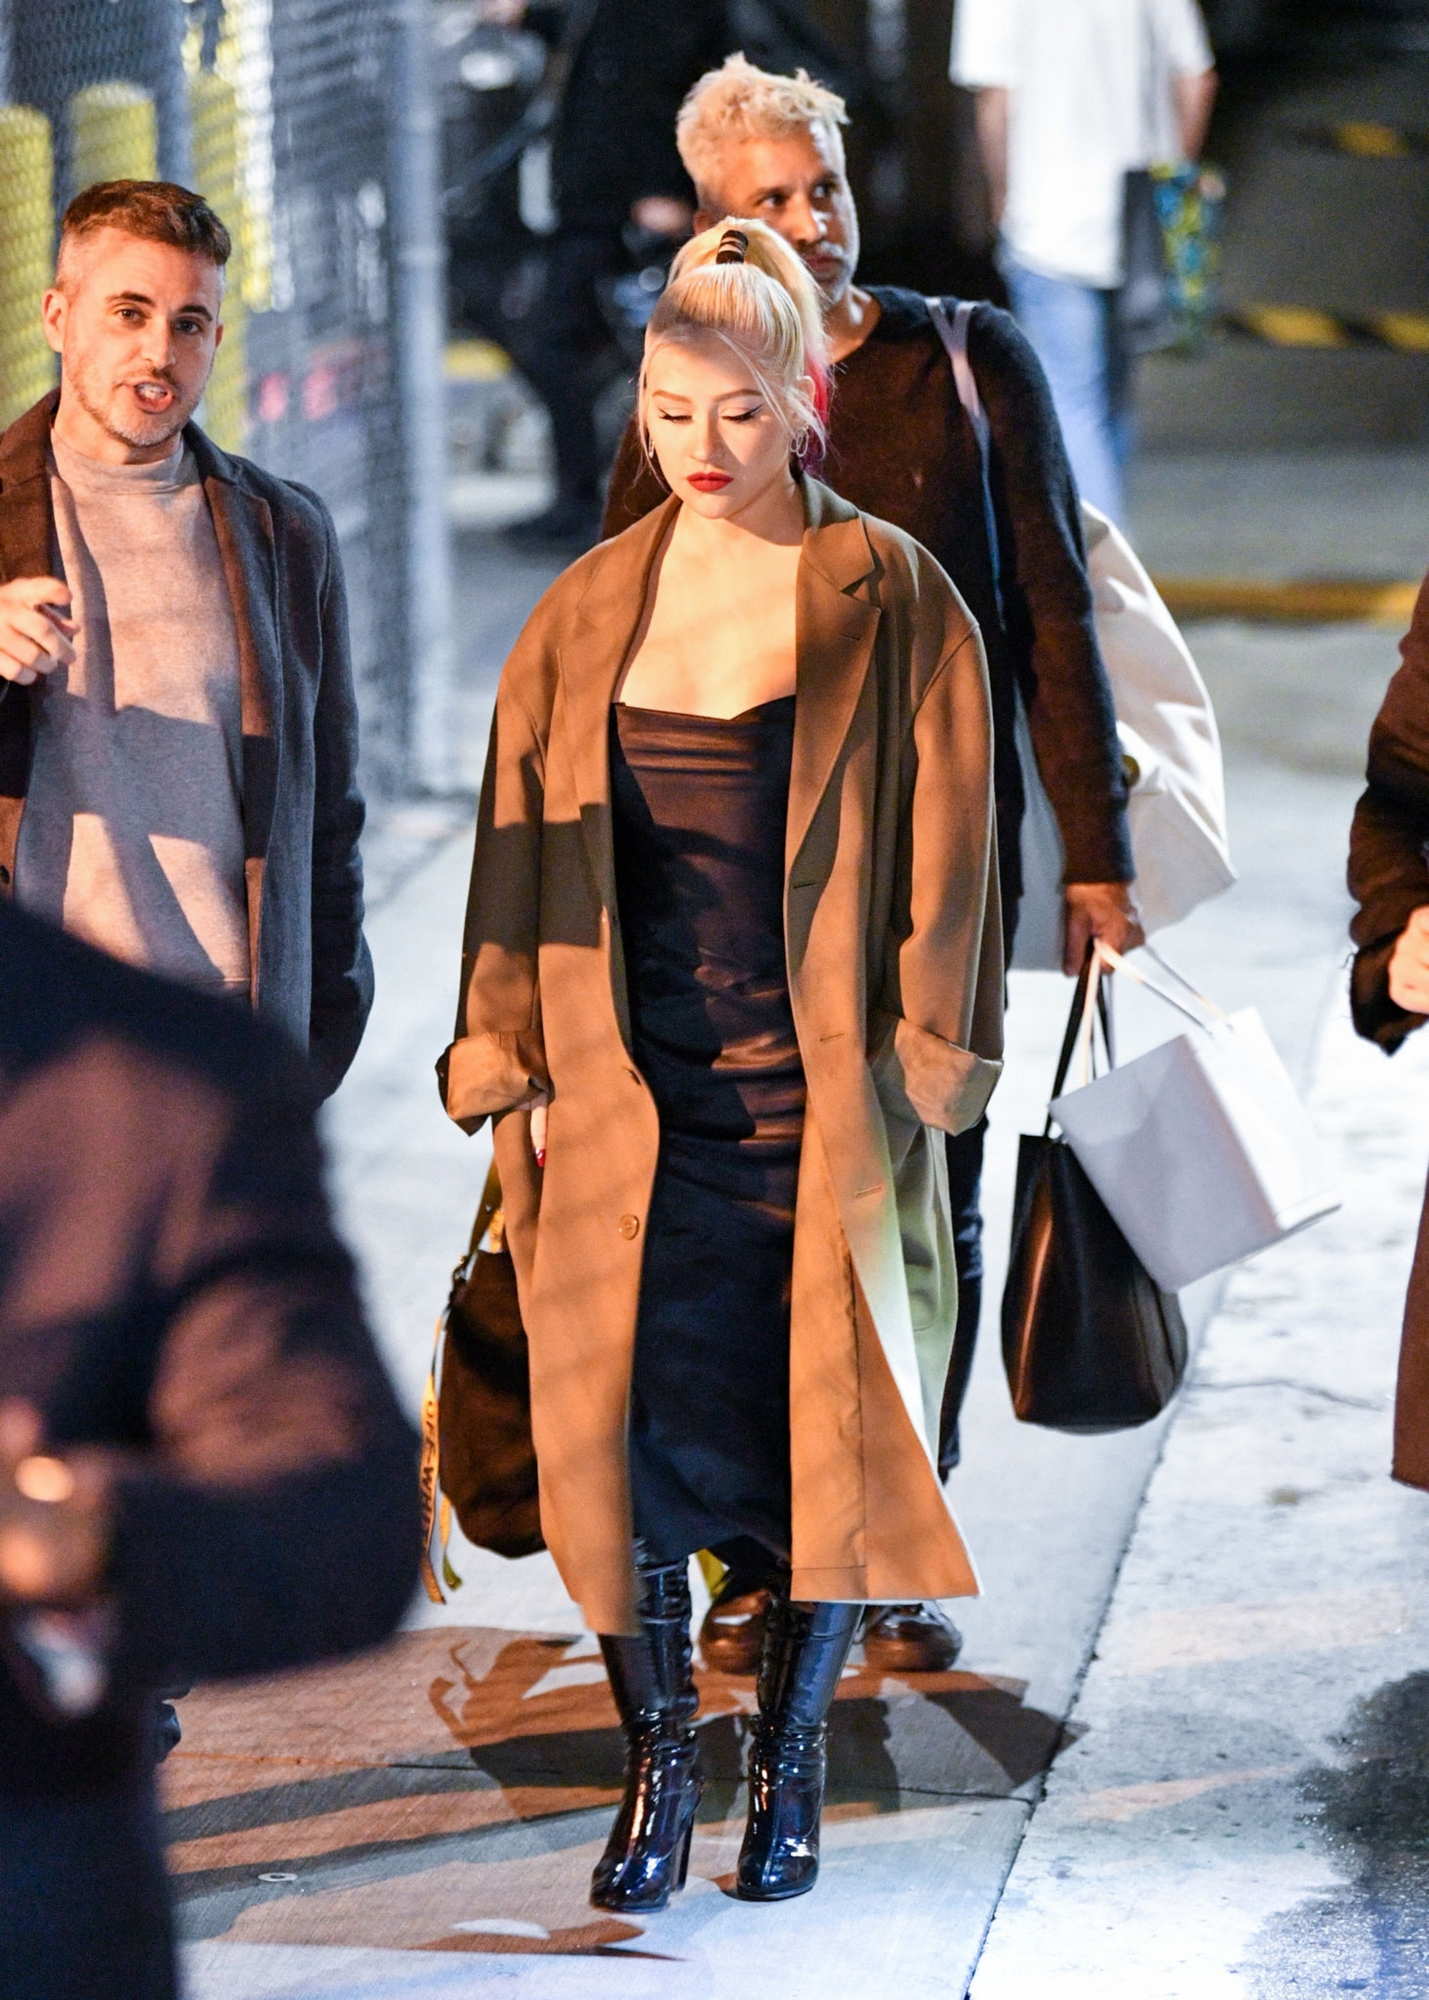 Christina Aguilera Greets her fans as she roams the streets in LA – March 10th